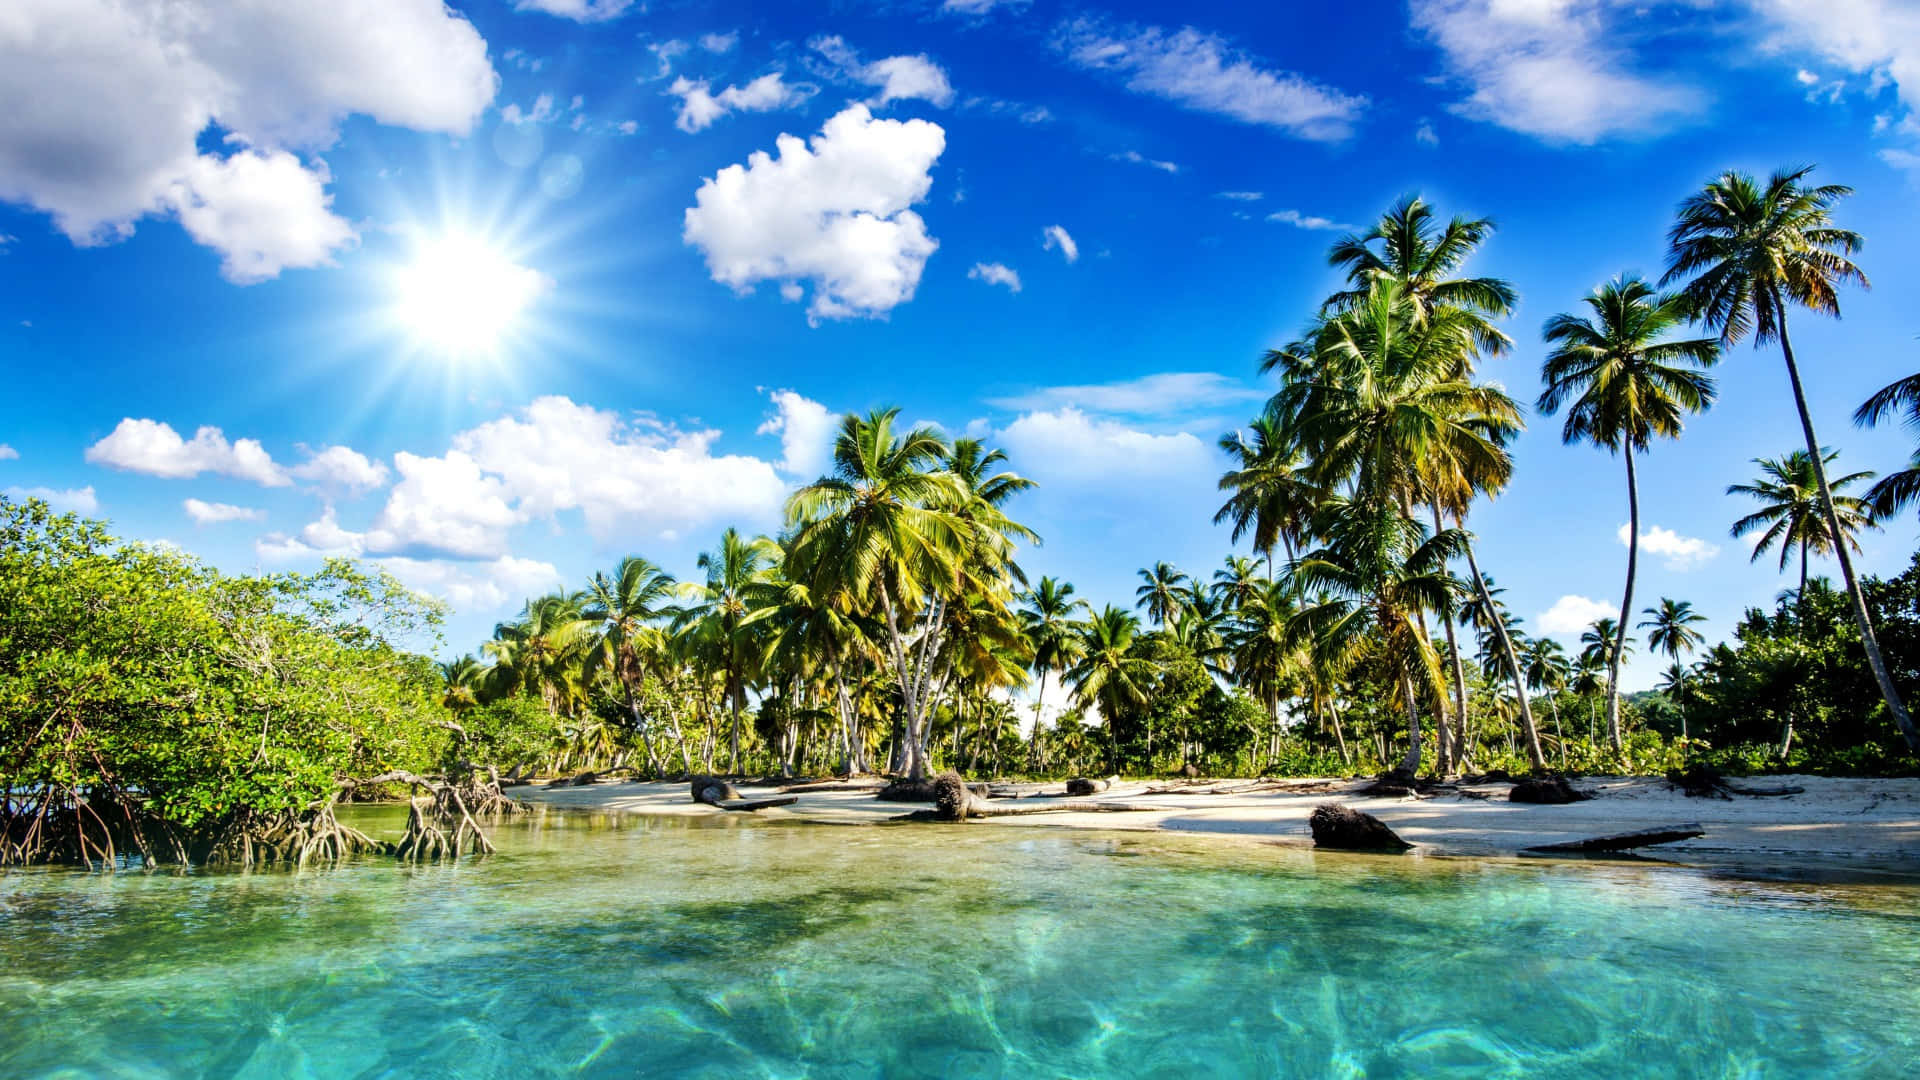 A Tropical Beach With Palm Trees And Clear Water